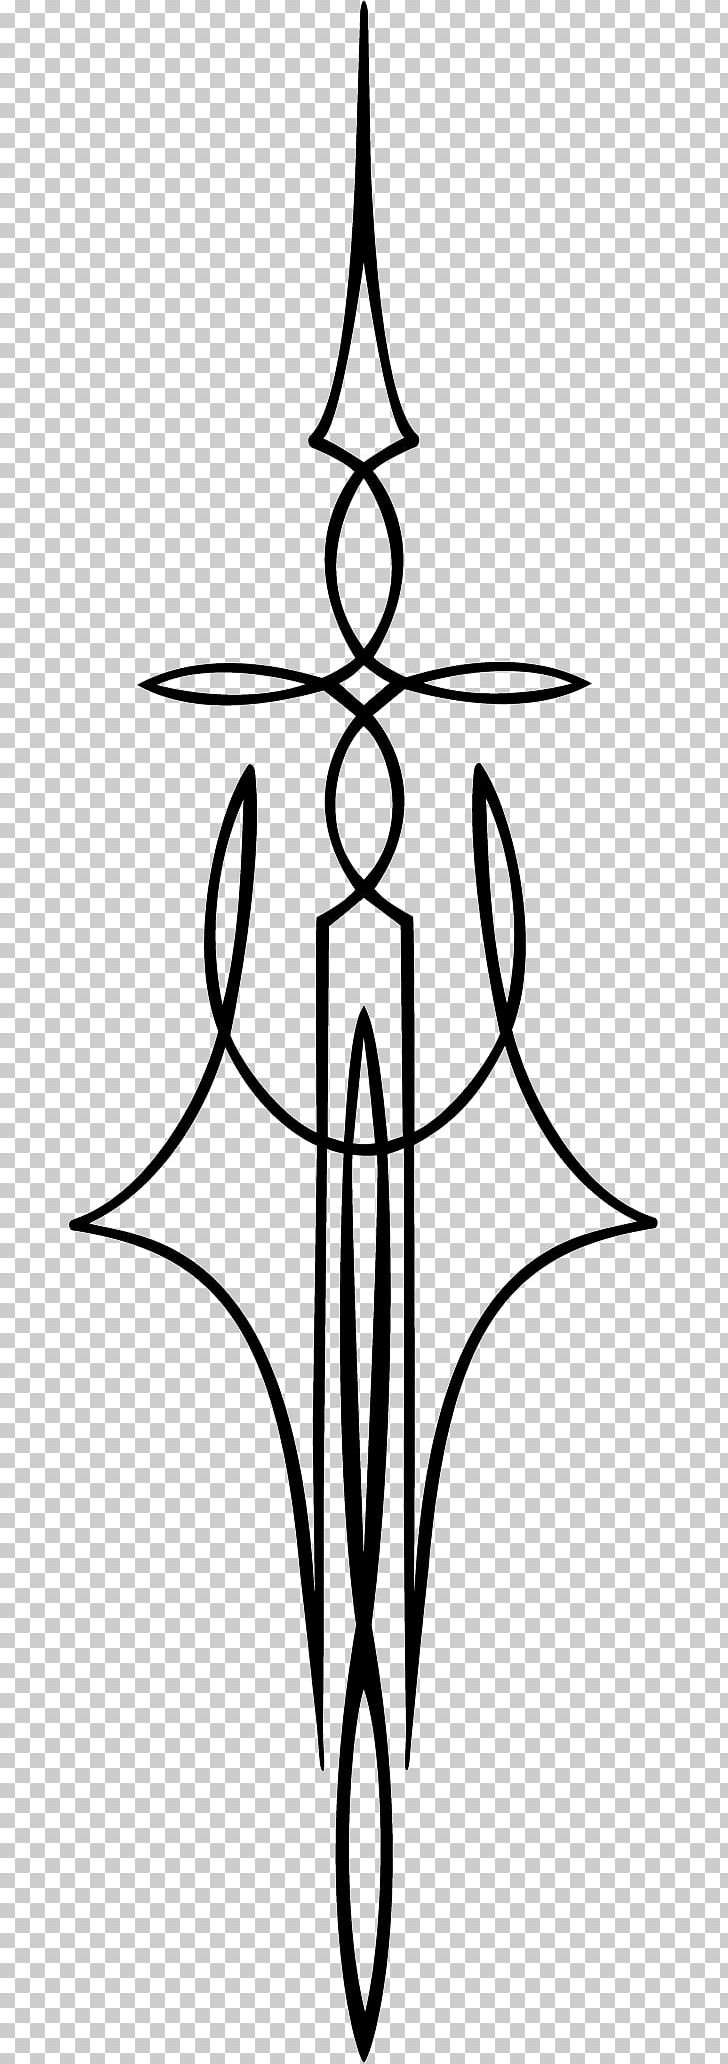 Symmetry Line Art PNG, Clipart, Art, Artwork, Black And White, Branch, Branching Free PNG Download